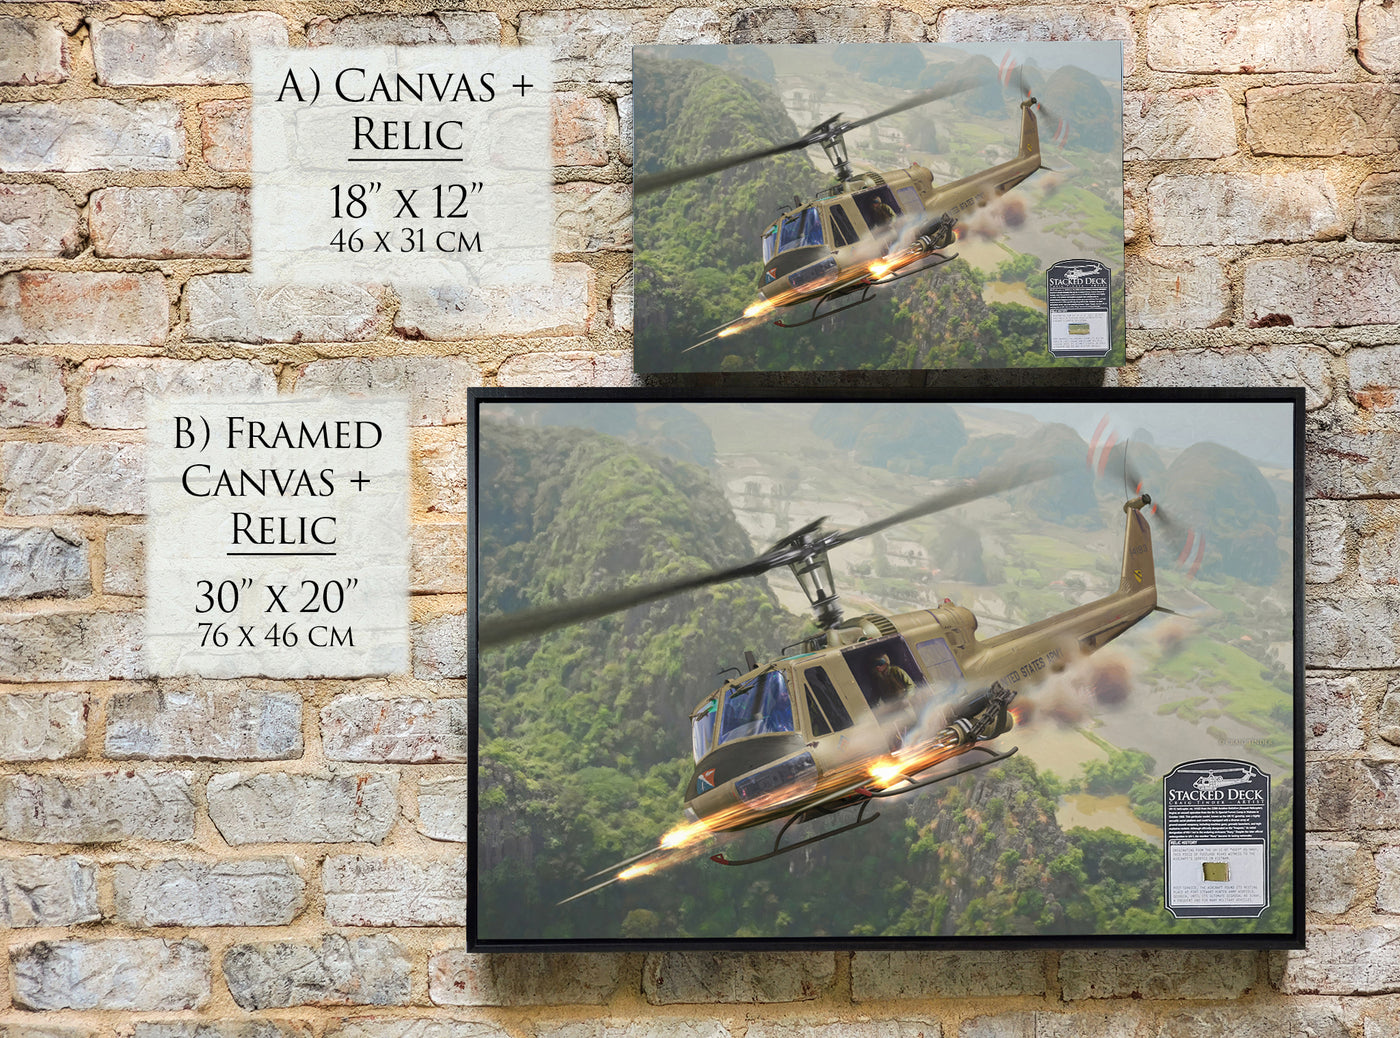 Framed 'Stacked Deck' UH-1C Huey helicopter painting displayed against a neutral background to emphasize the art.